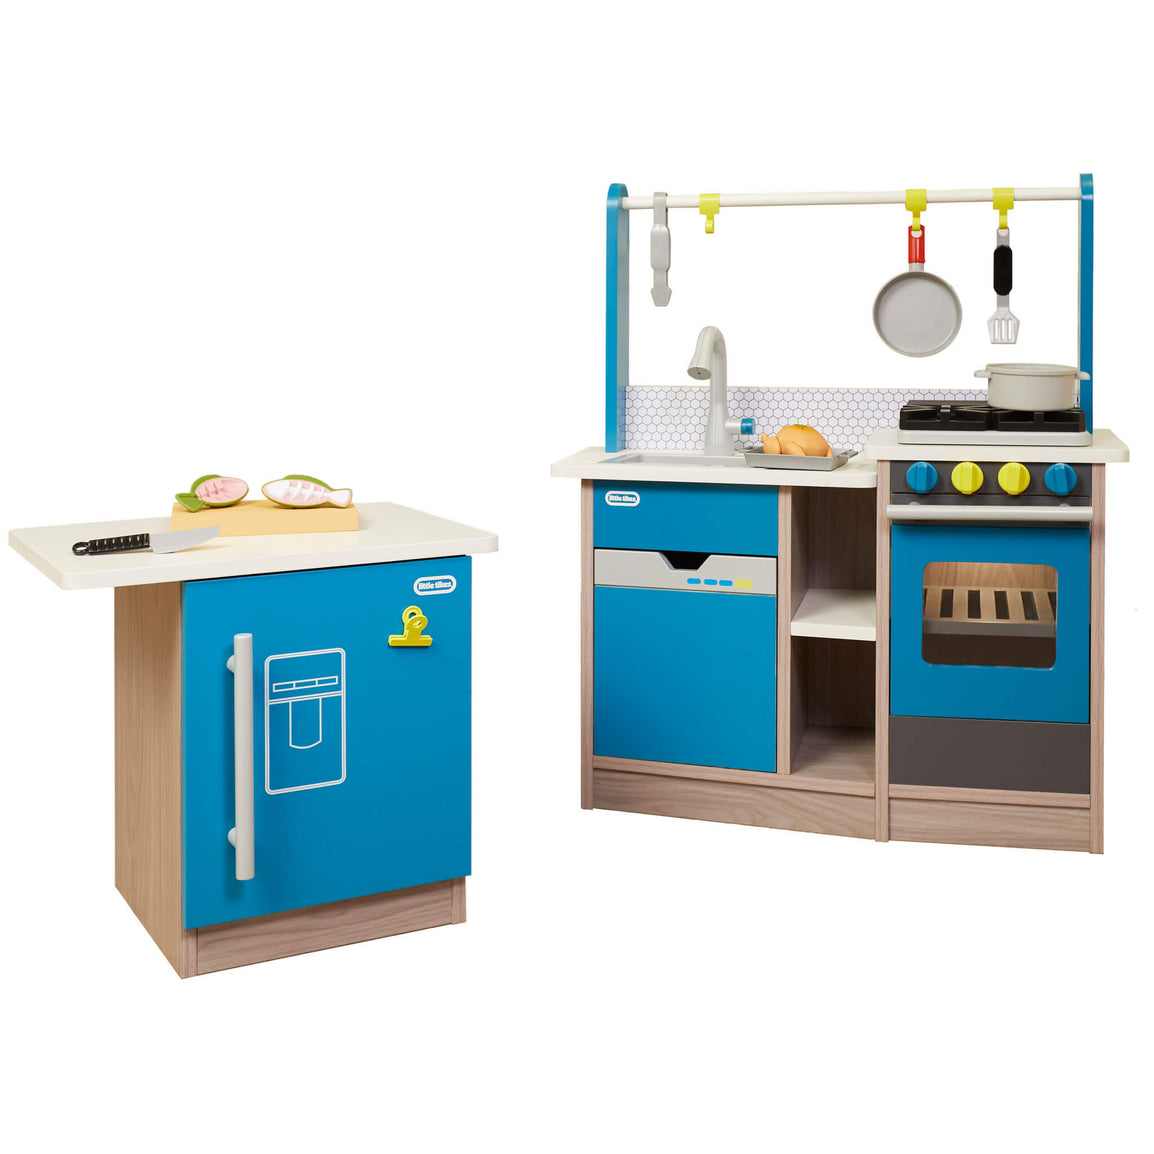 Real Wood Kitchen with Island - Official Little Tikes Website